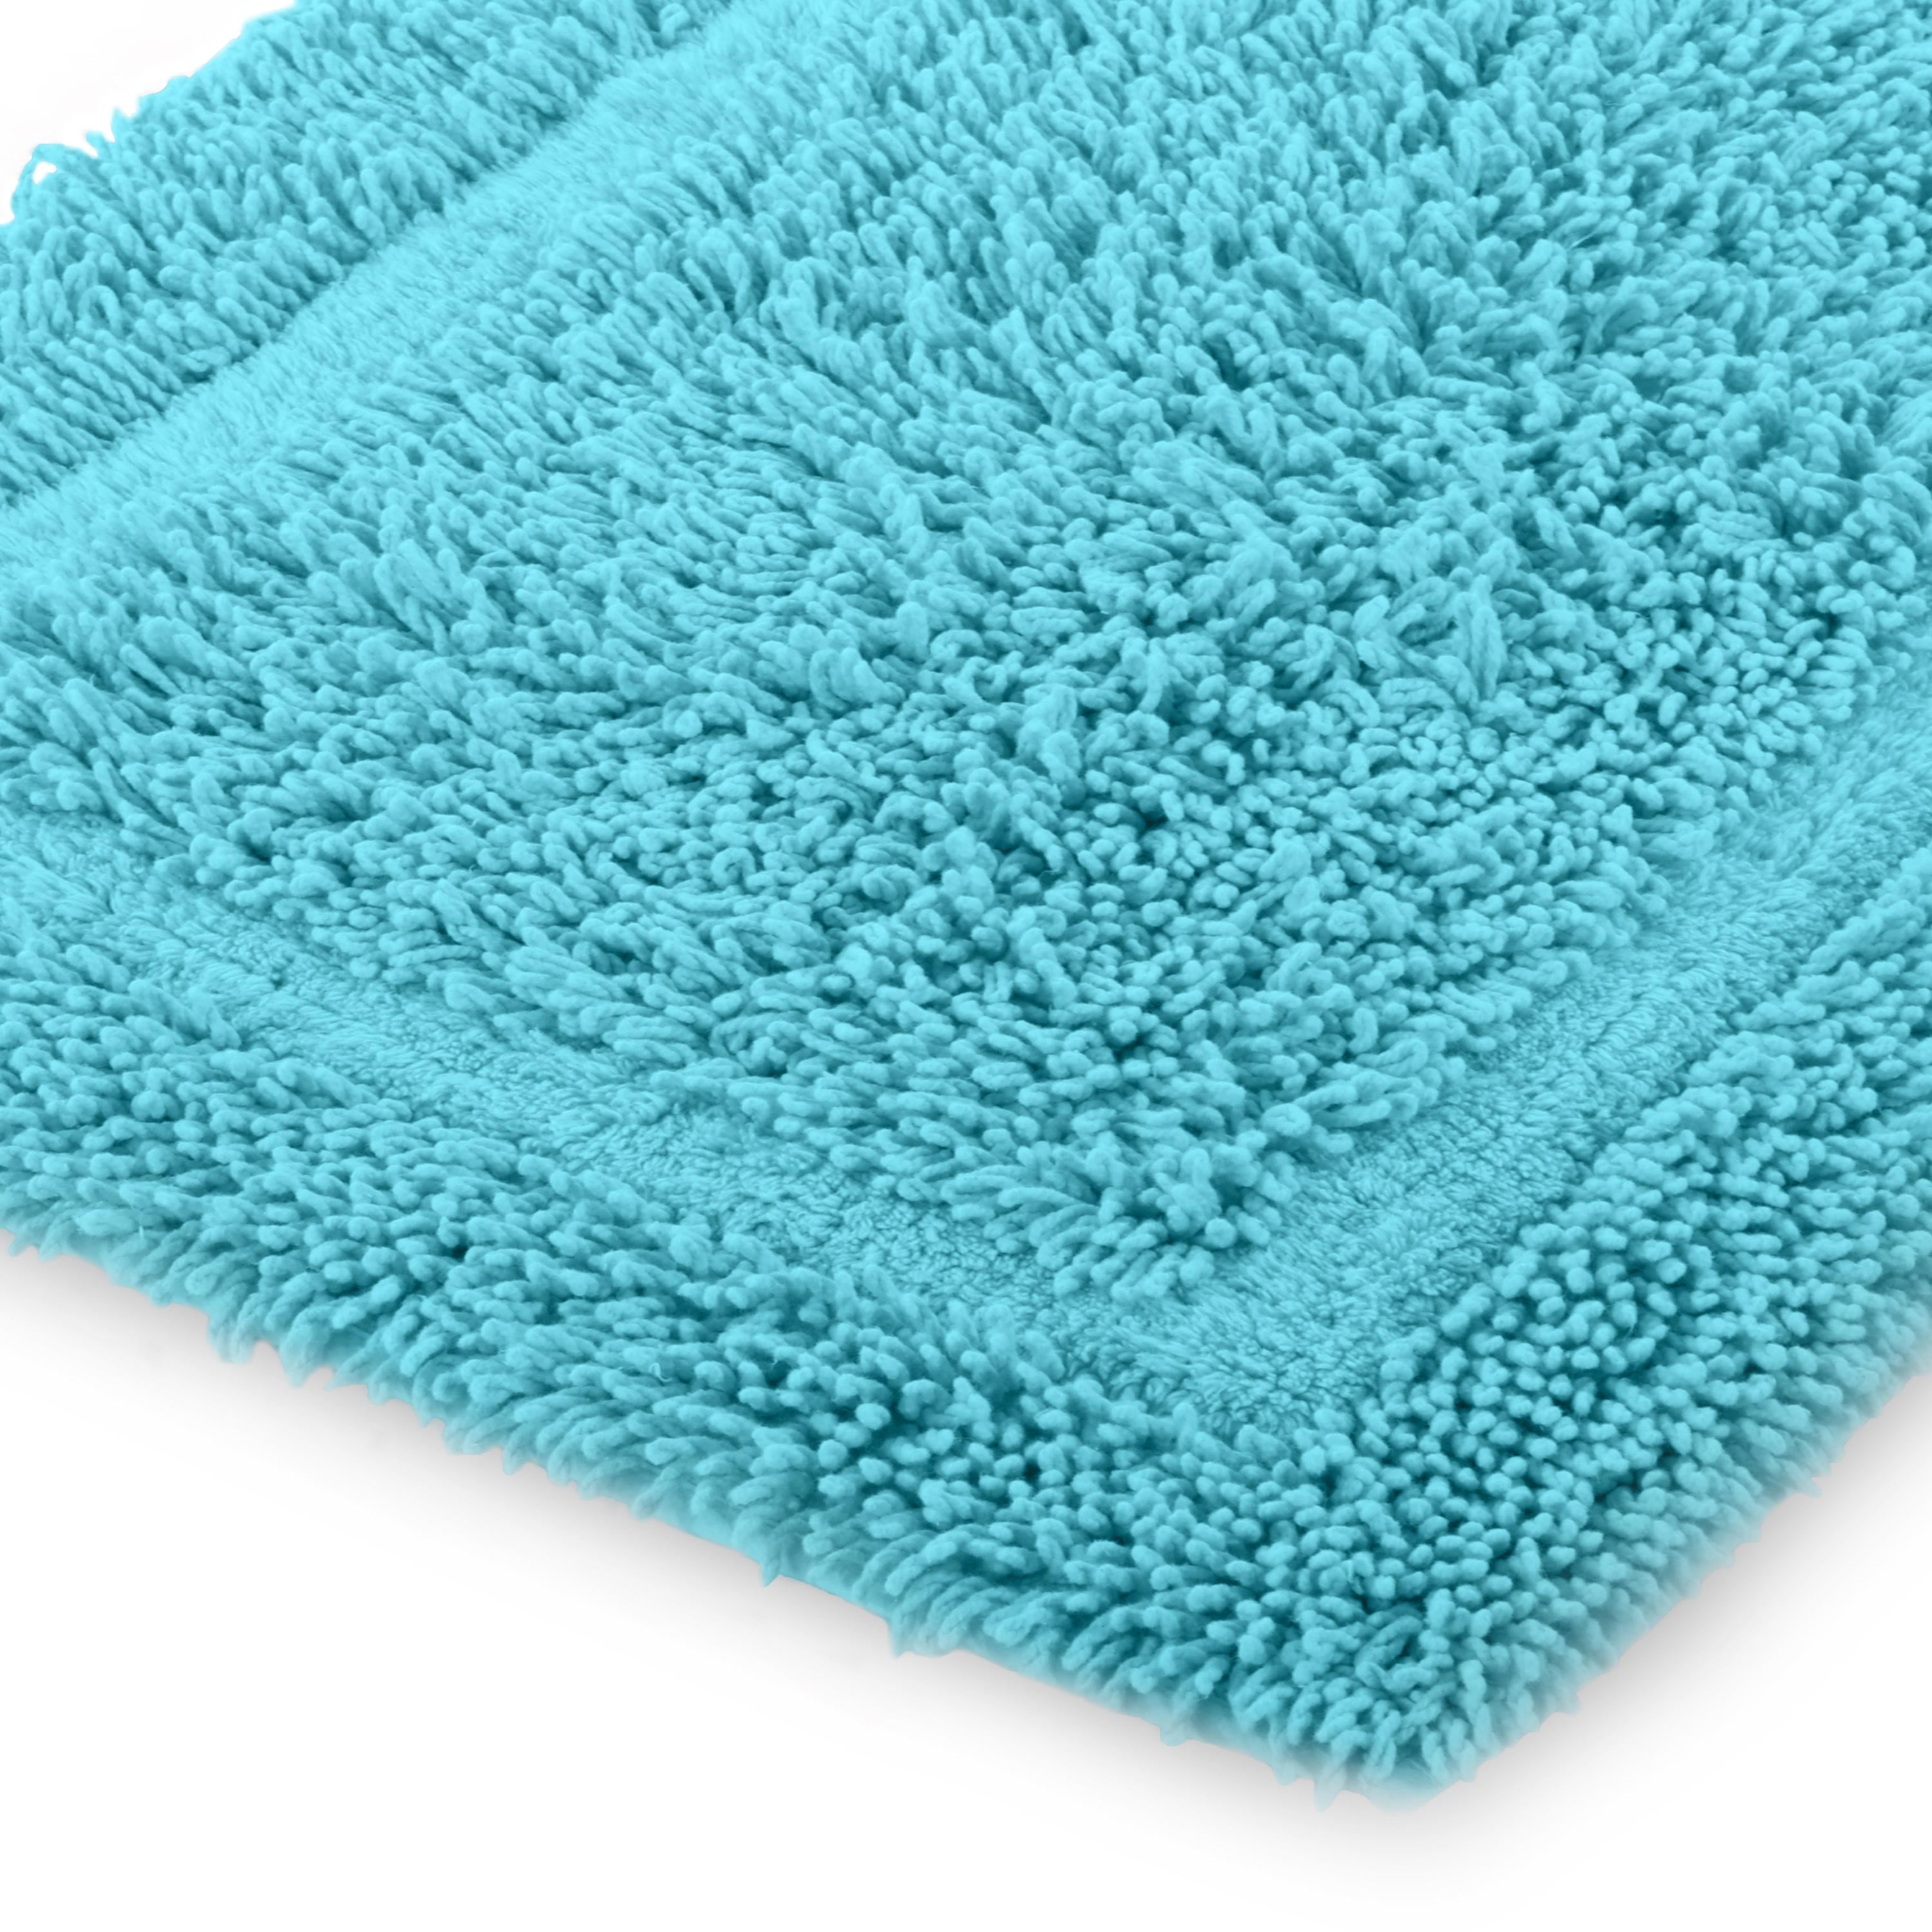 Kartri Rubber Bath Mat for Hotels, 13.5 x 30, Breathable Openings, Pack of 12